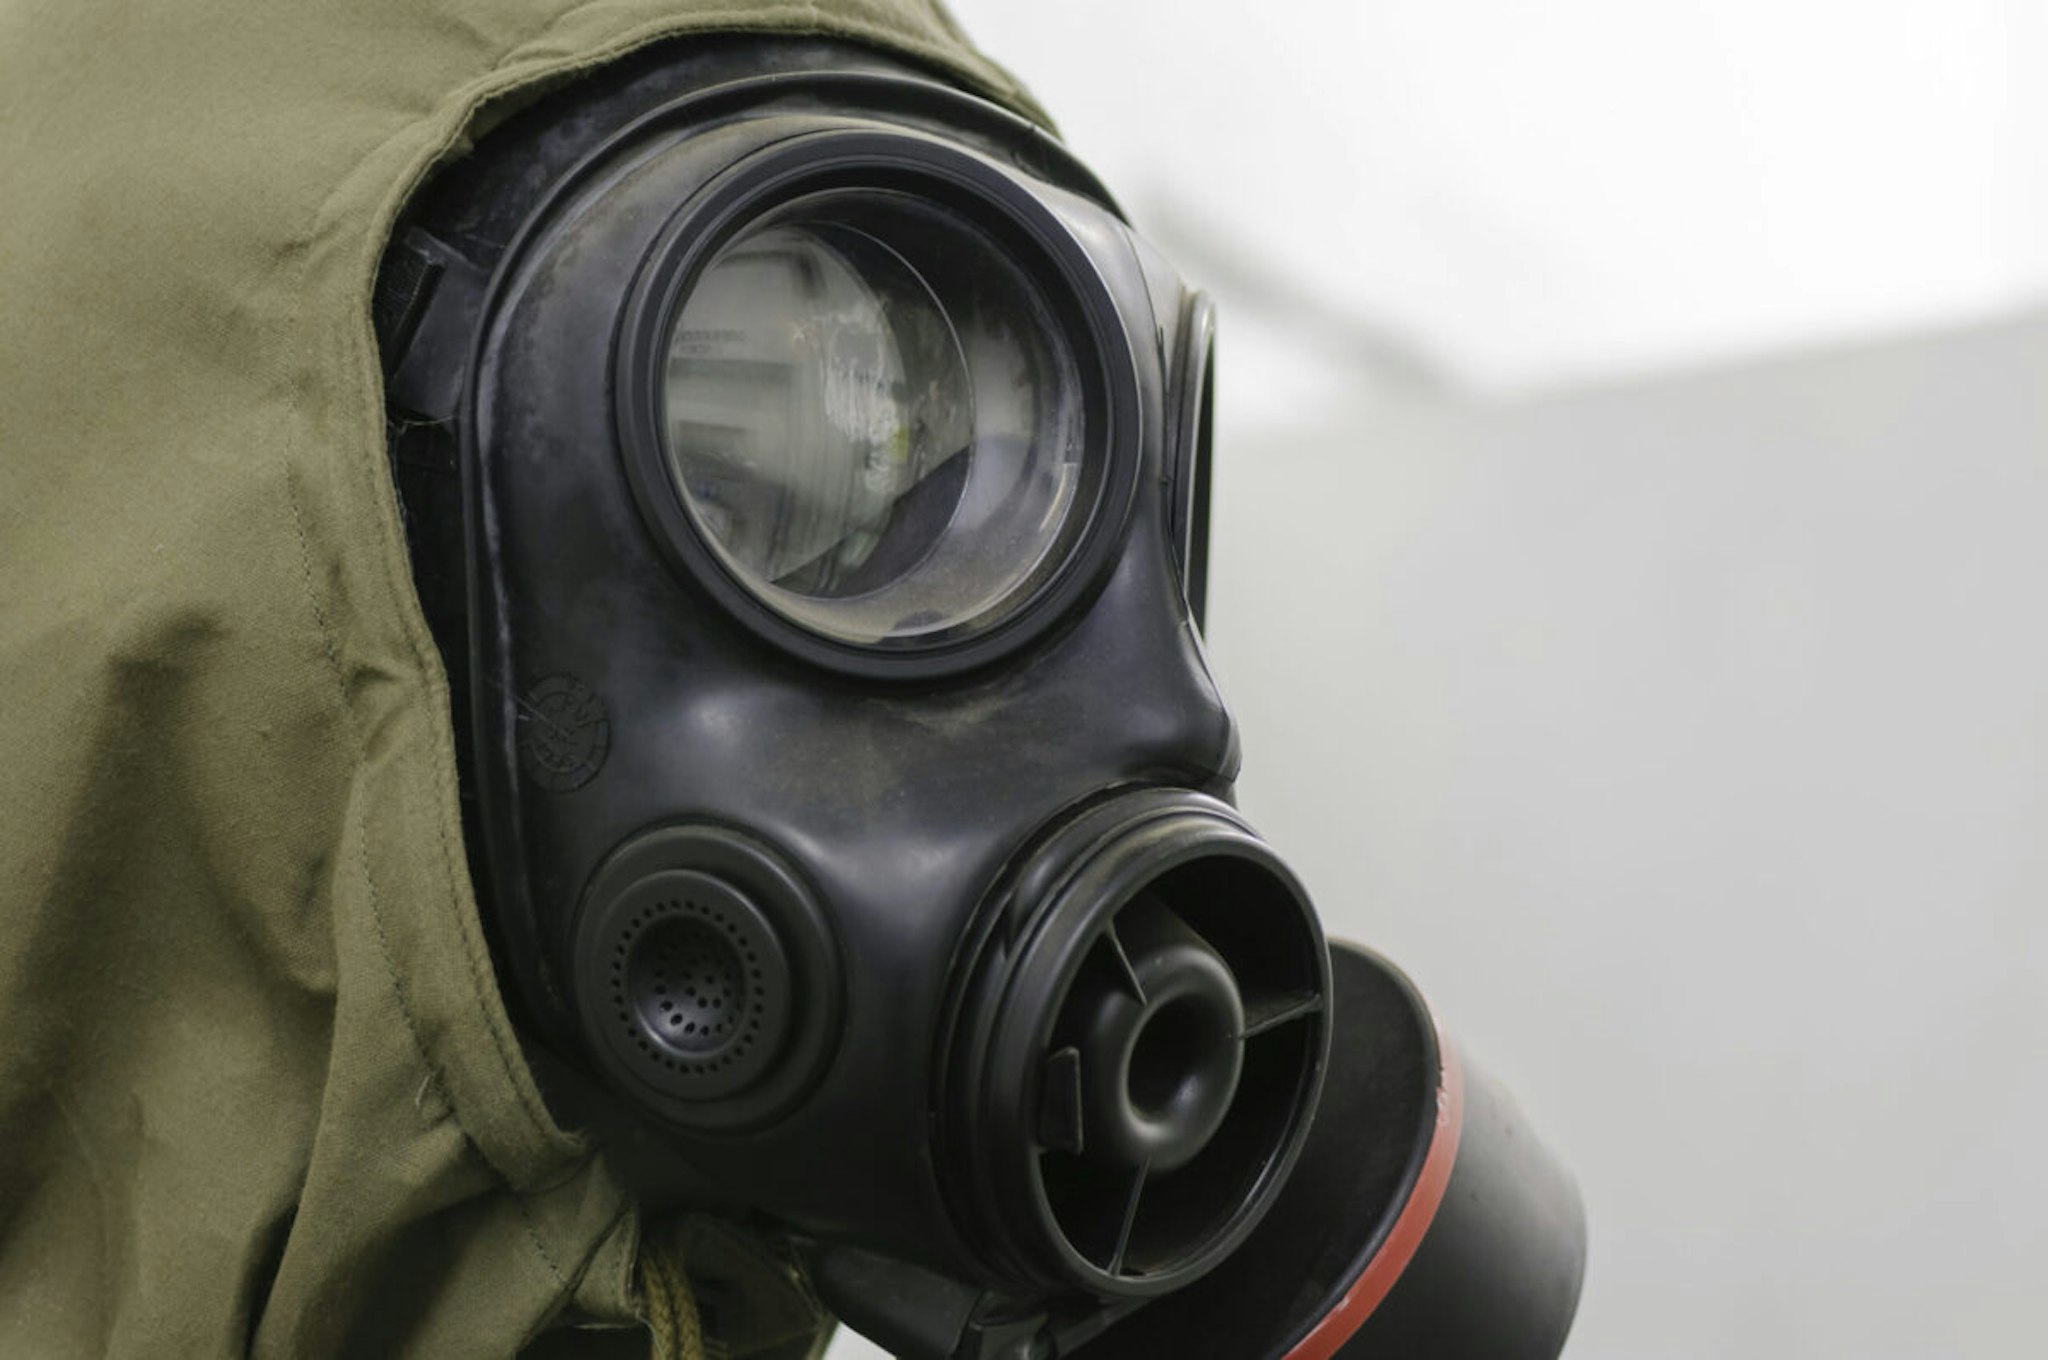 Gasmask and Nuclear, Biological and Chemical (NBC) suit